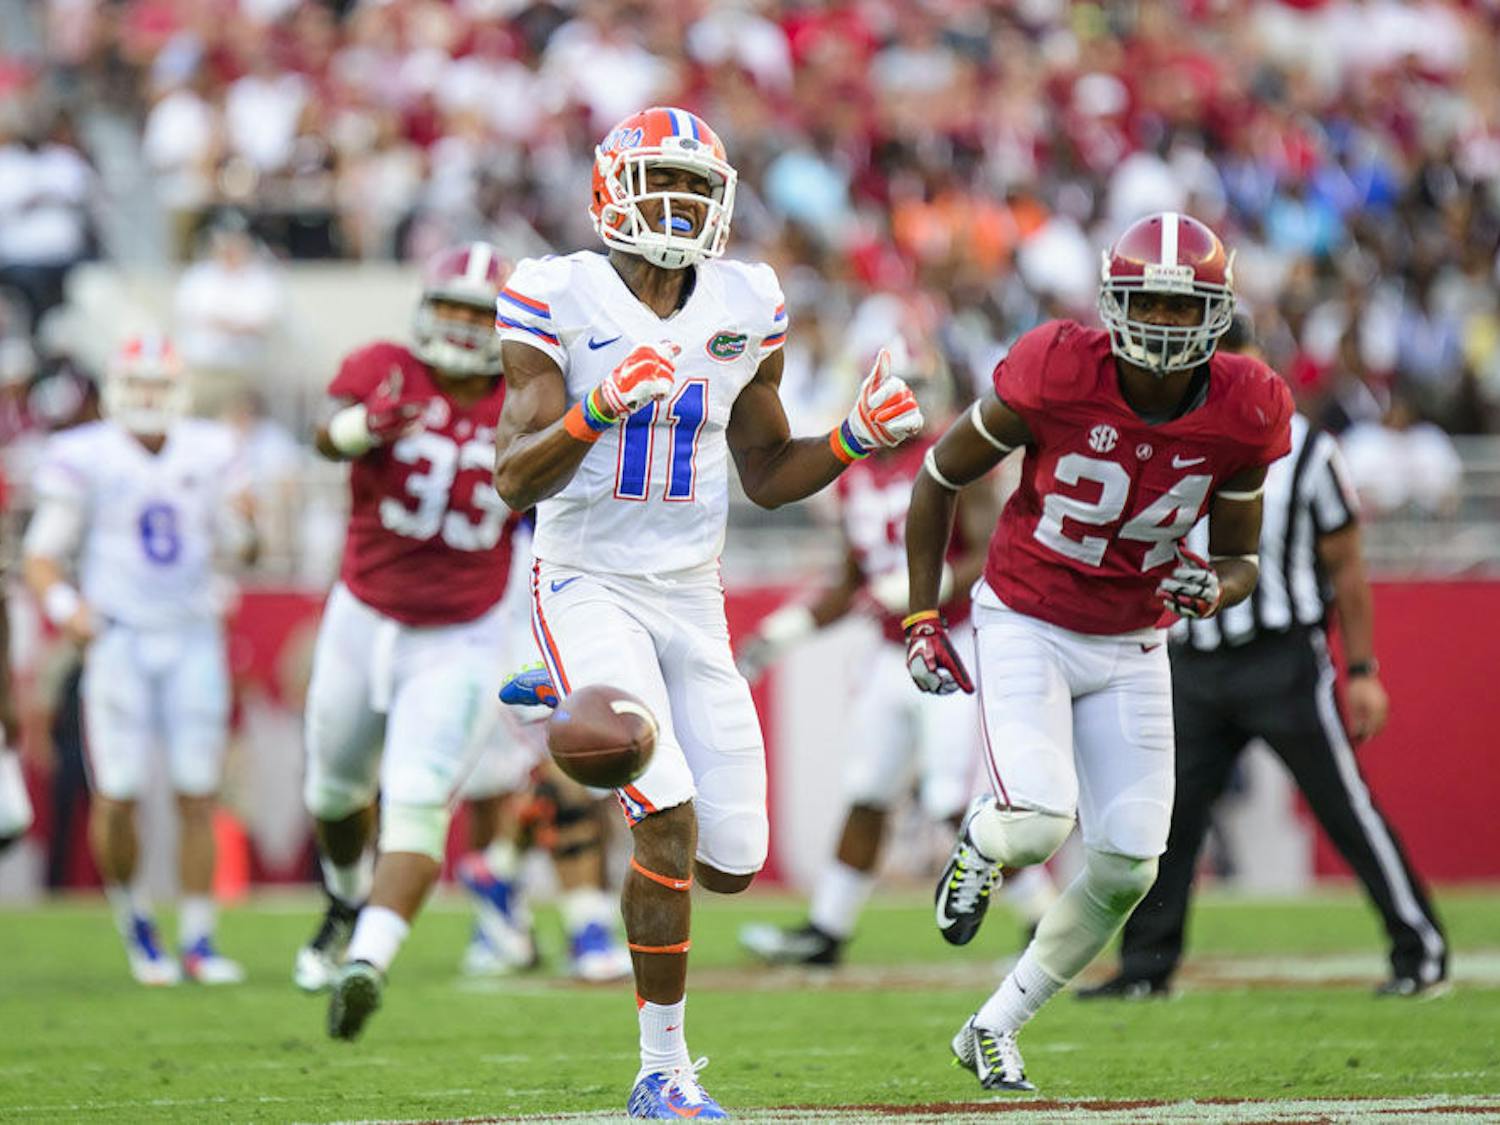 Demarcus Robinson (11) reacts after an incompleted pass during Florida's 21-42 loss to Alabama on Saturday at Bryant-Denny Stadium.